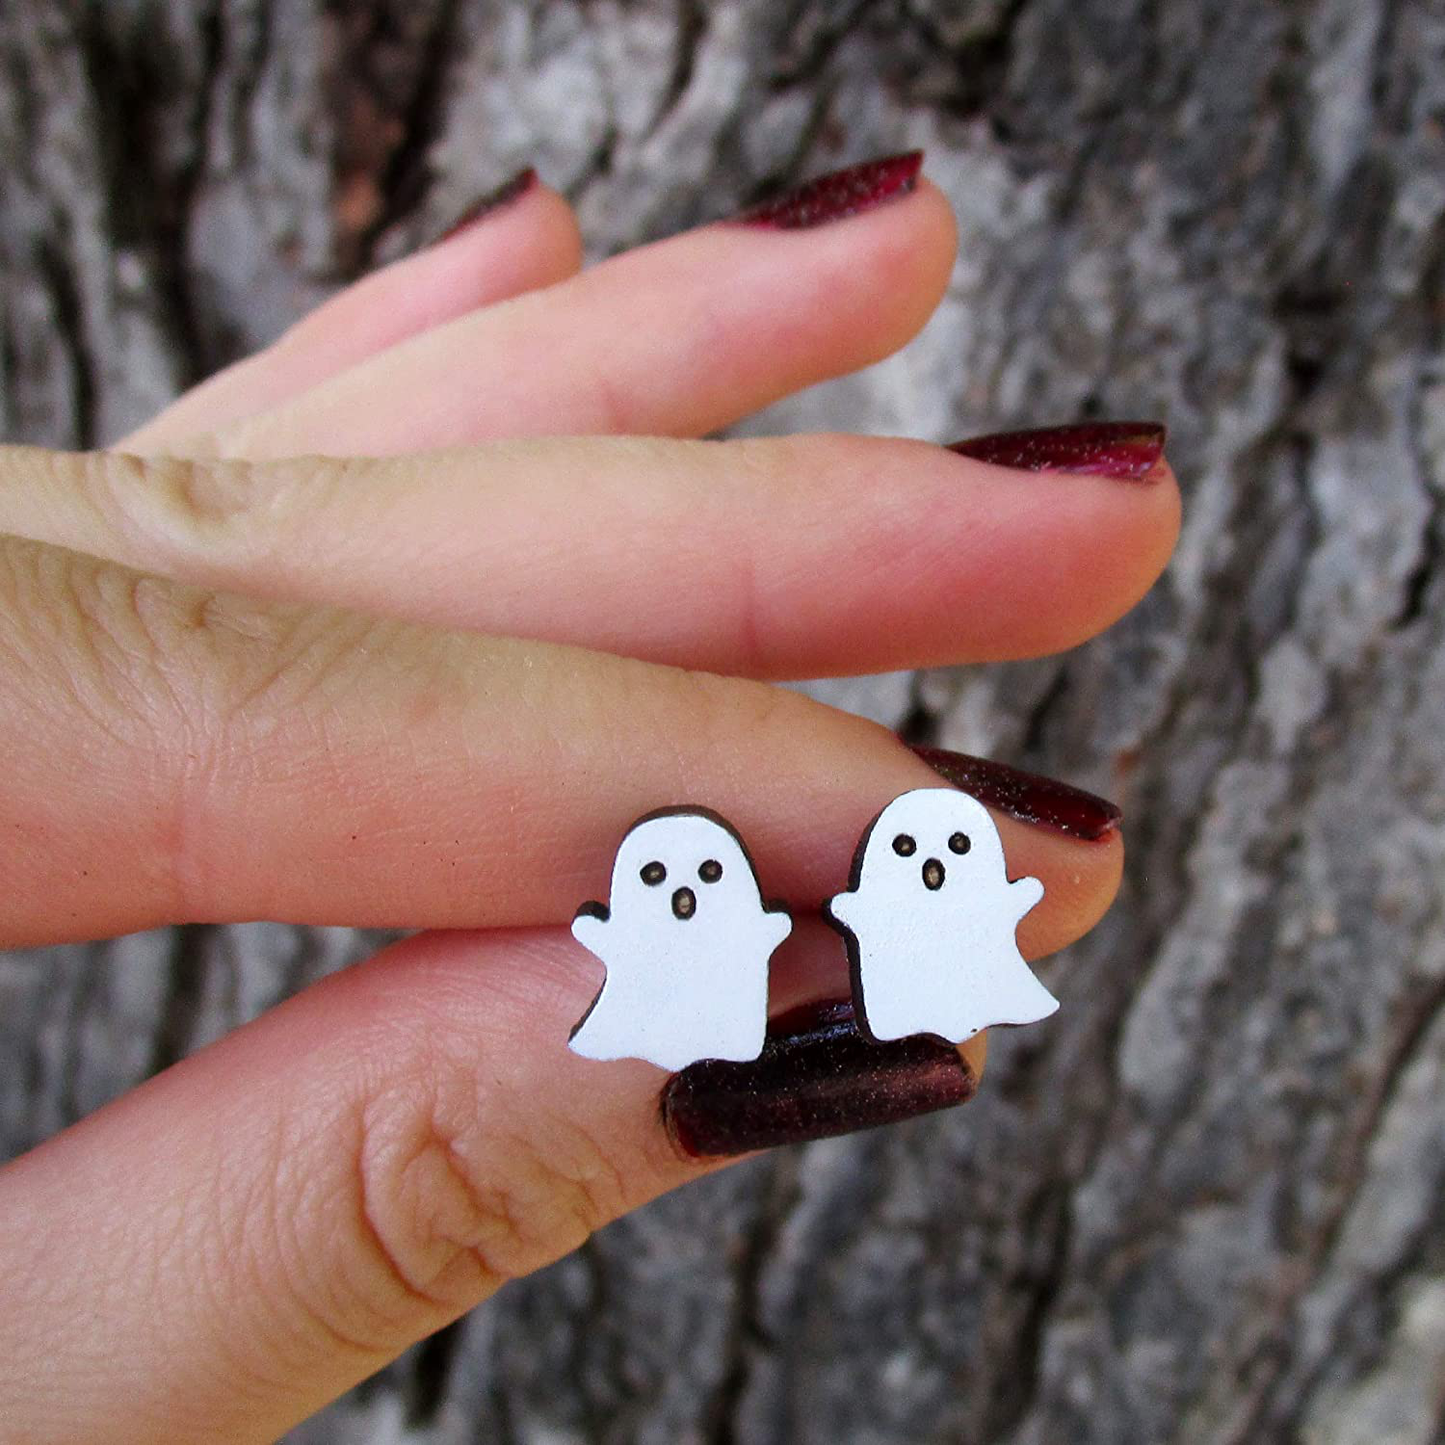 Cute Little Kawaii Wooden White Ghost Stud Earrings, Adorable Funny Halloween Jewelry Stainless Steel Posts